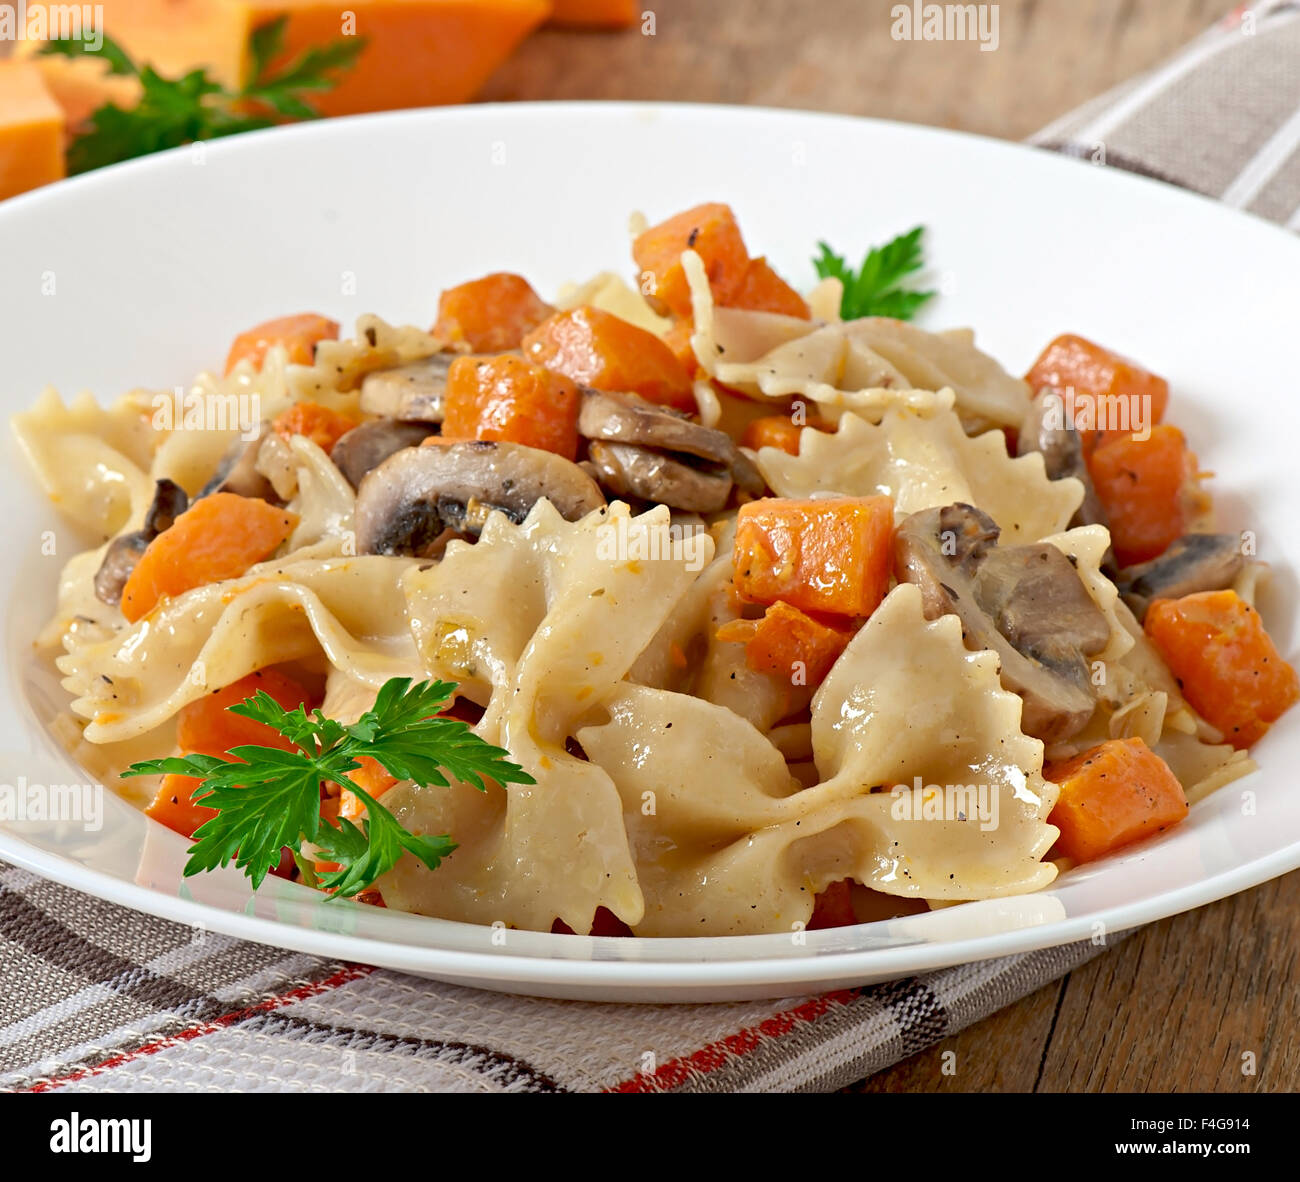 Pasta In Cream Sauce With Slices Of Pumpkin And Mushroom Stock Photo Alamy